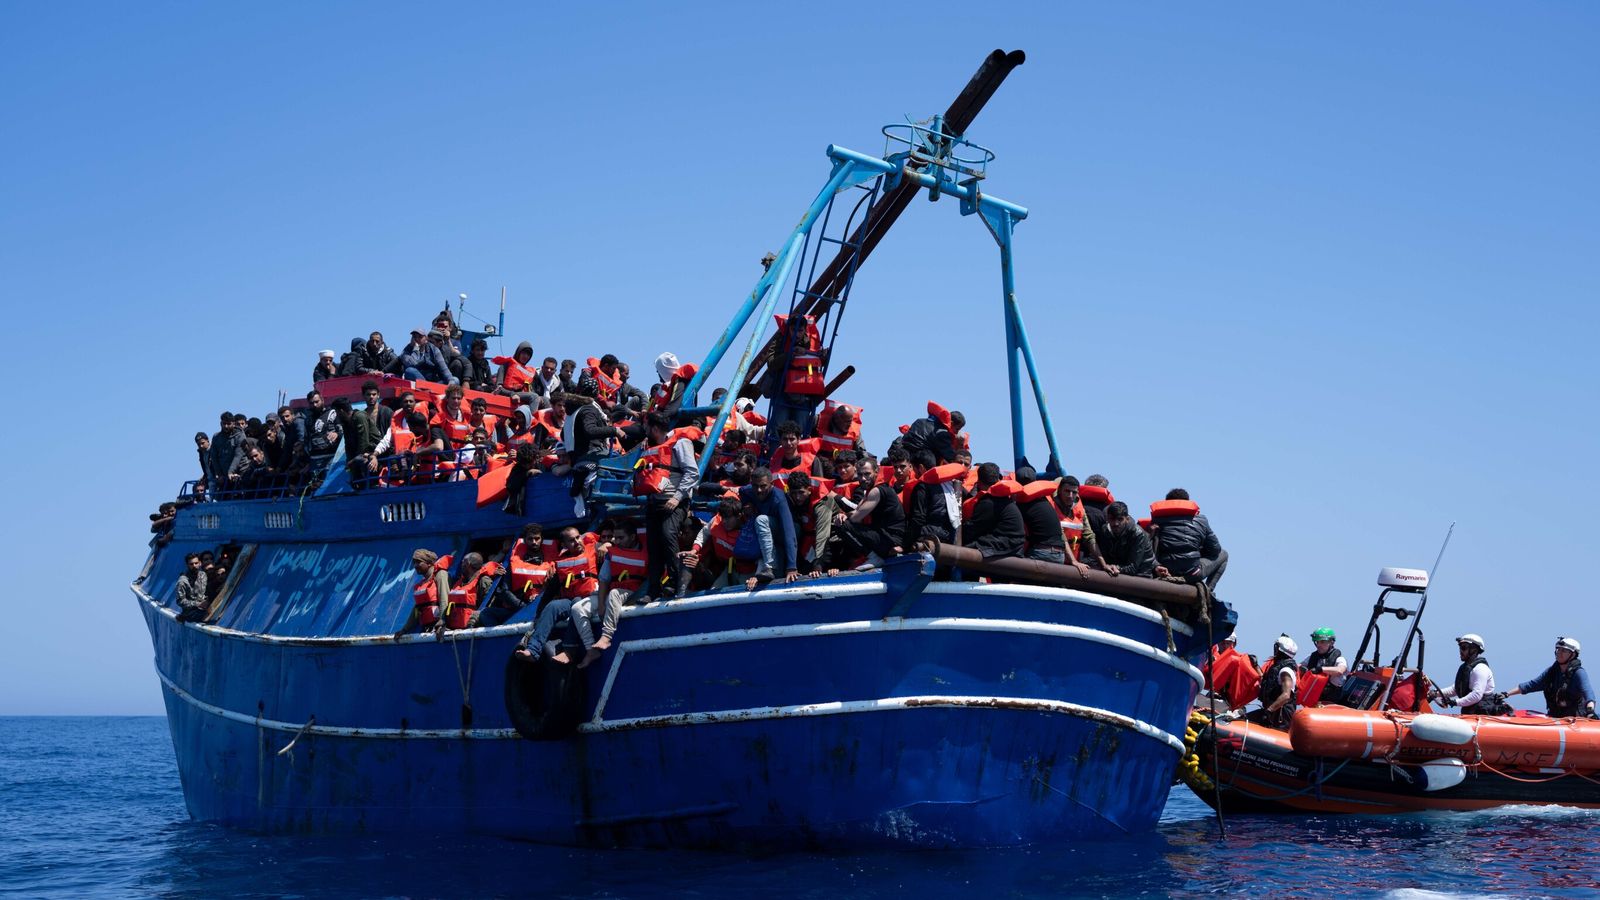 'We all thought we were going to die': The rescue of 600 people from the Mediterranean